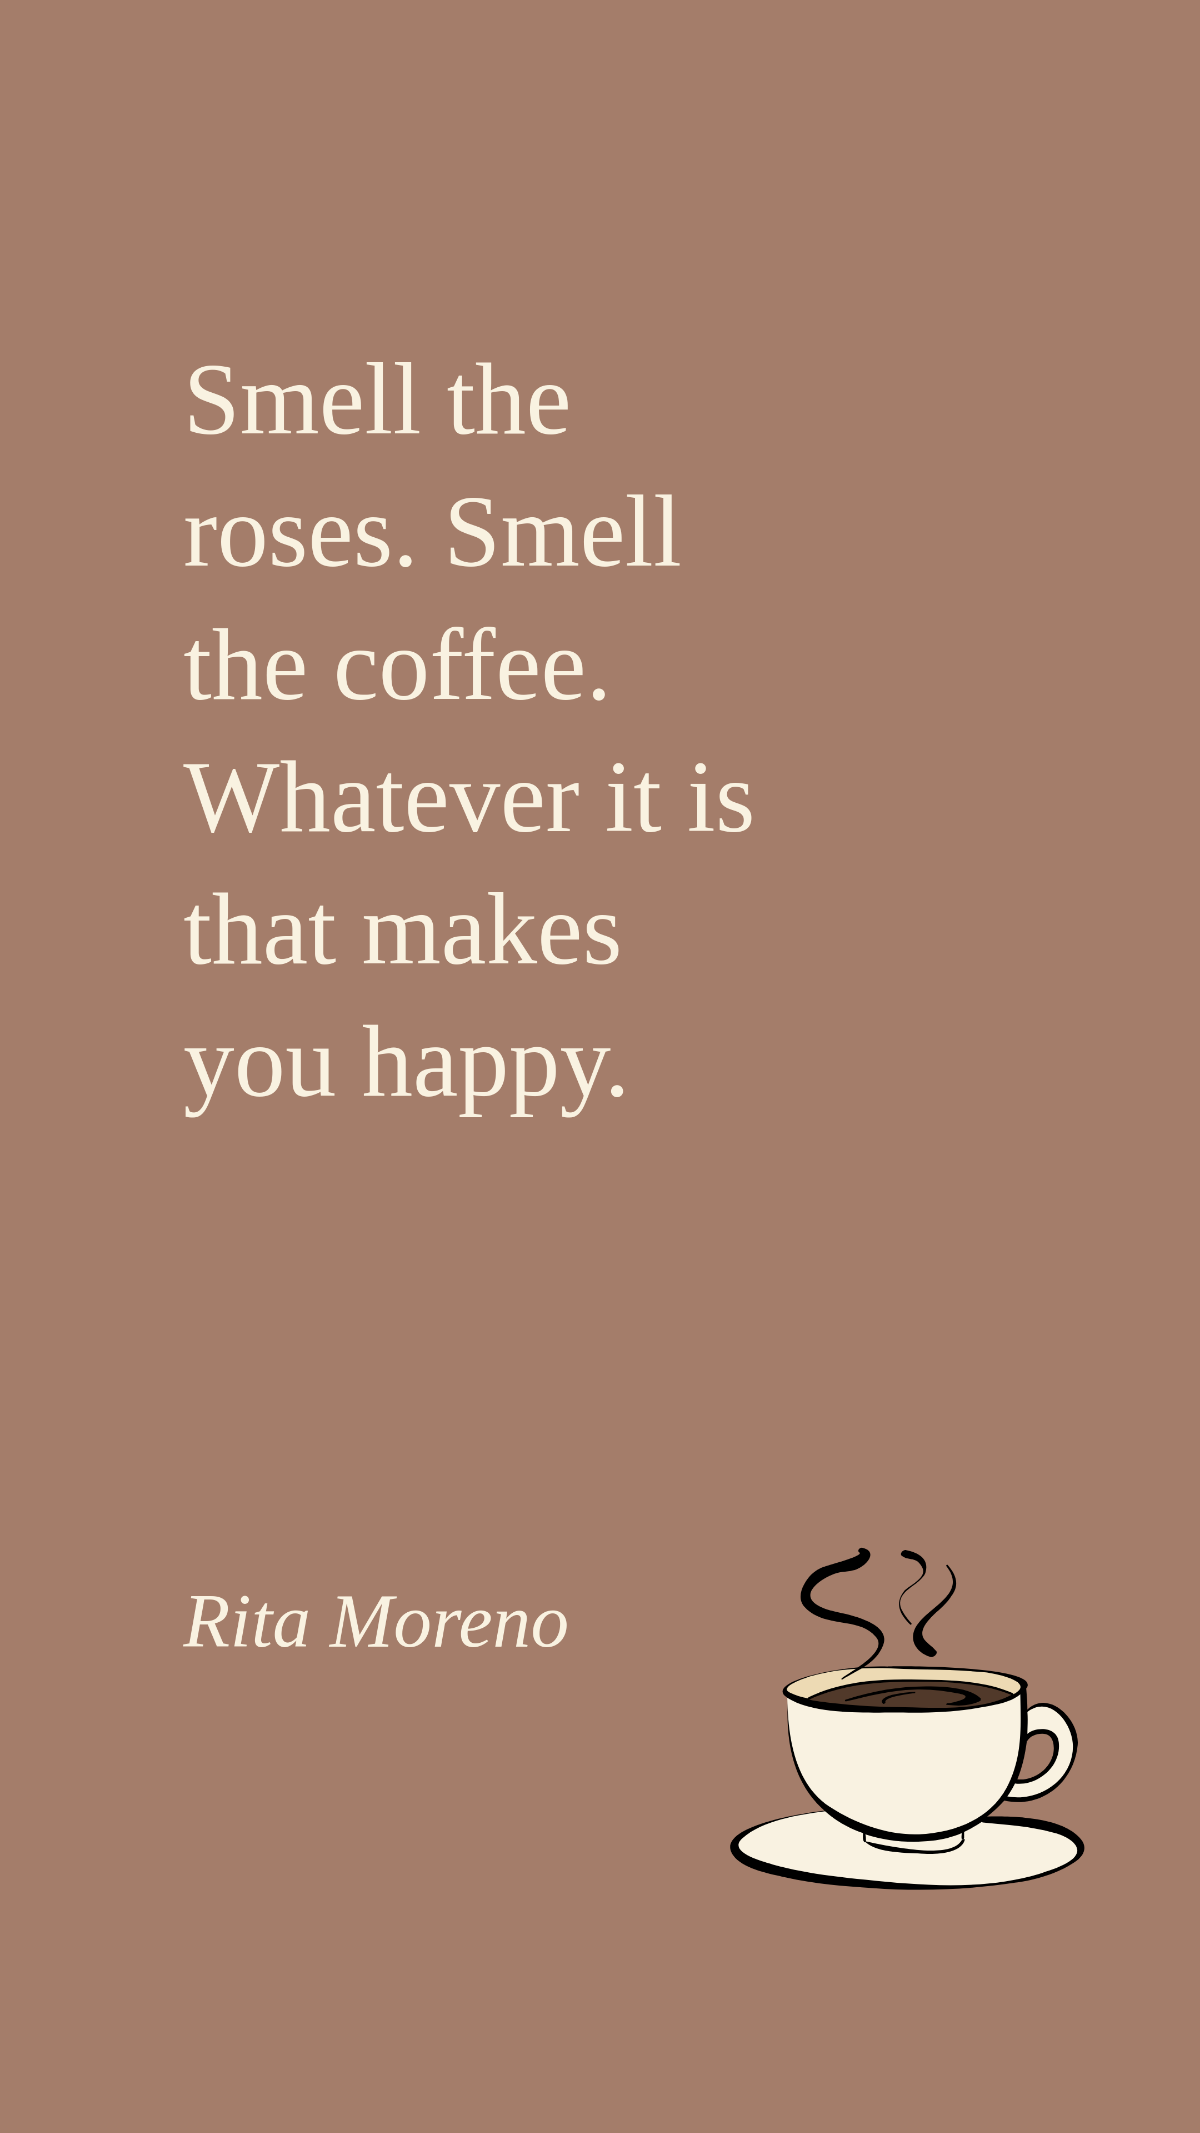 Rita Moreno - Smell the roses. Smell the coffee. Whatever it is that makes you happy. Template